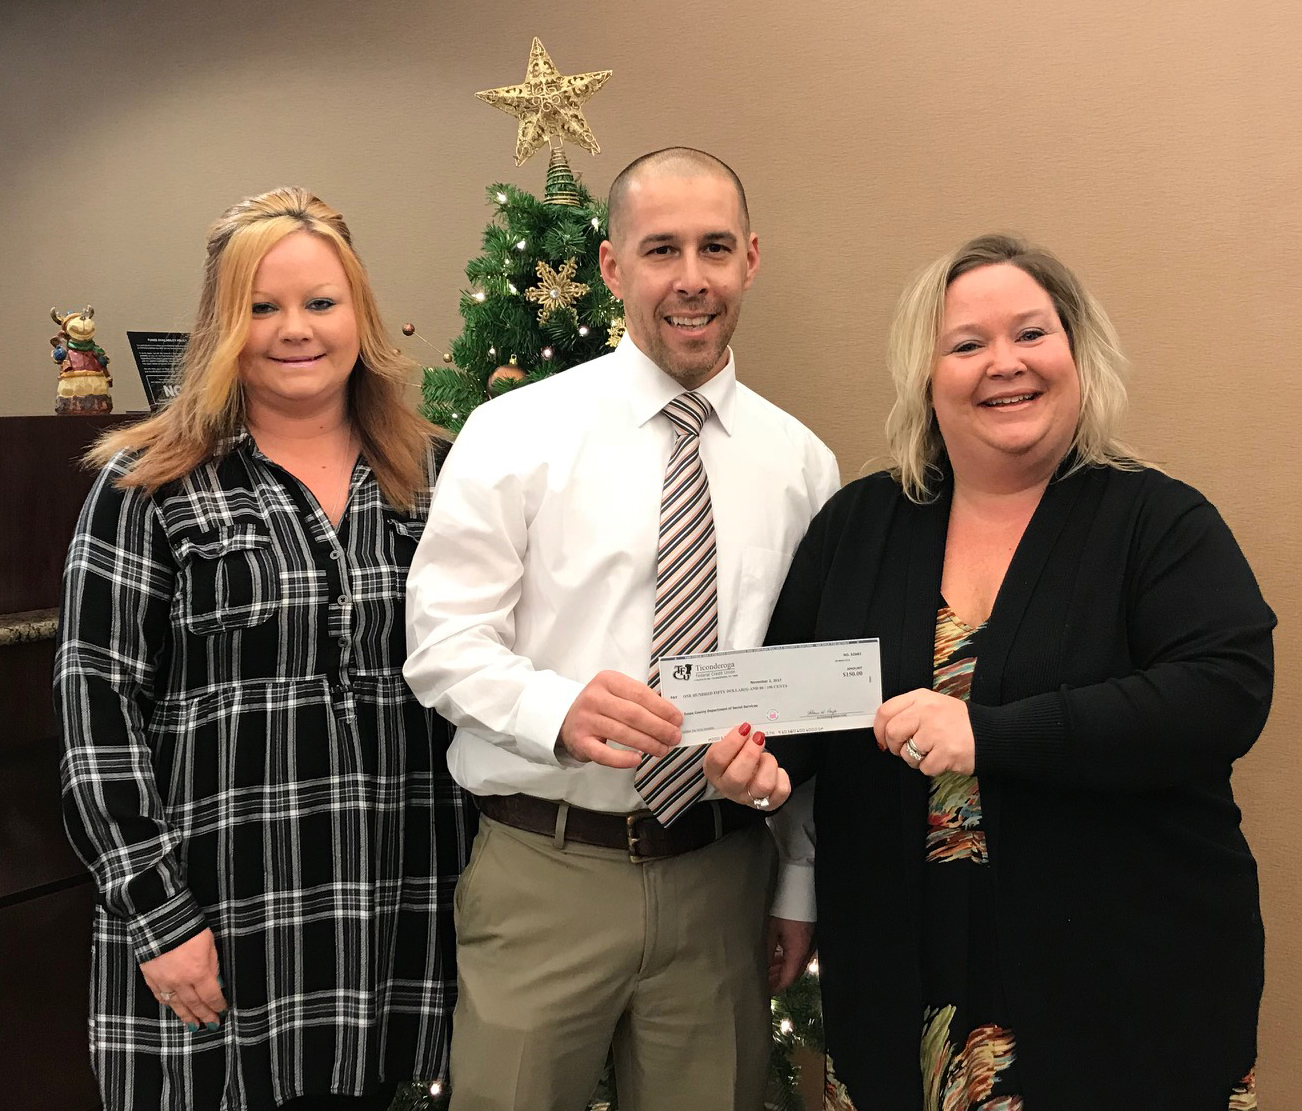 TFCU Member Service representative Shannon Denton and Branch Manager Wendy Courtright presenting TFCU's donation to Mike Mascarenas, Essex County Department of Social Services Commissioner for their annual Toy Drive.